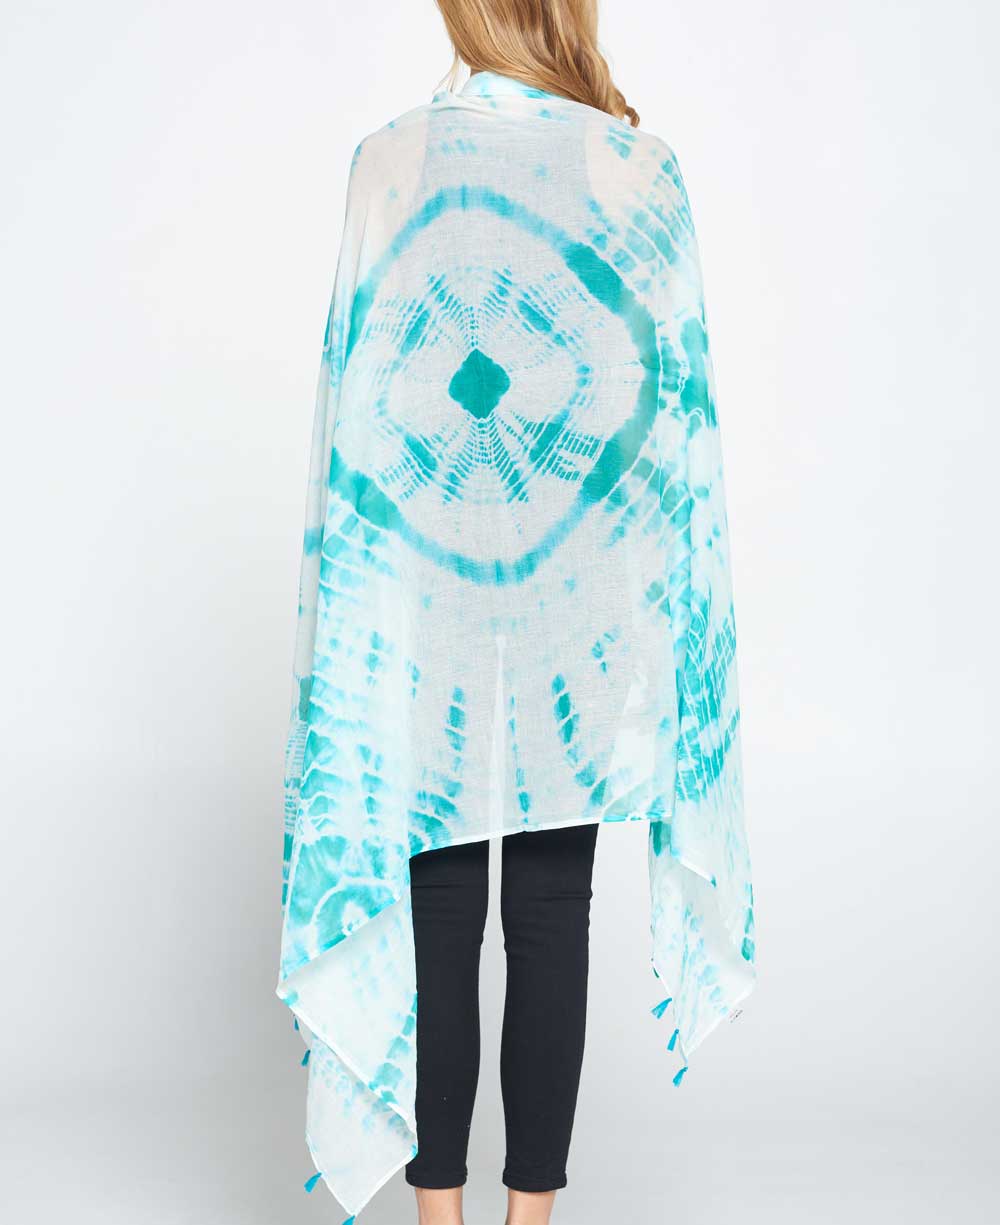 Tie and Dye Sheer Cotton Summer Scarf in Sea Green - Scarves